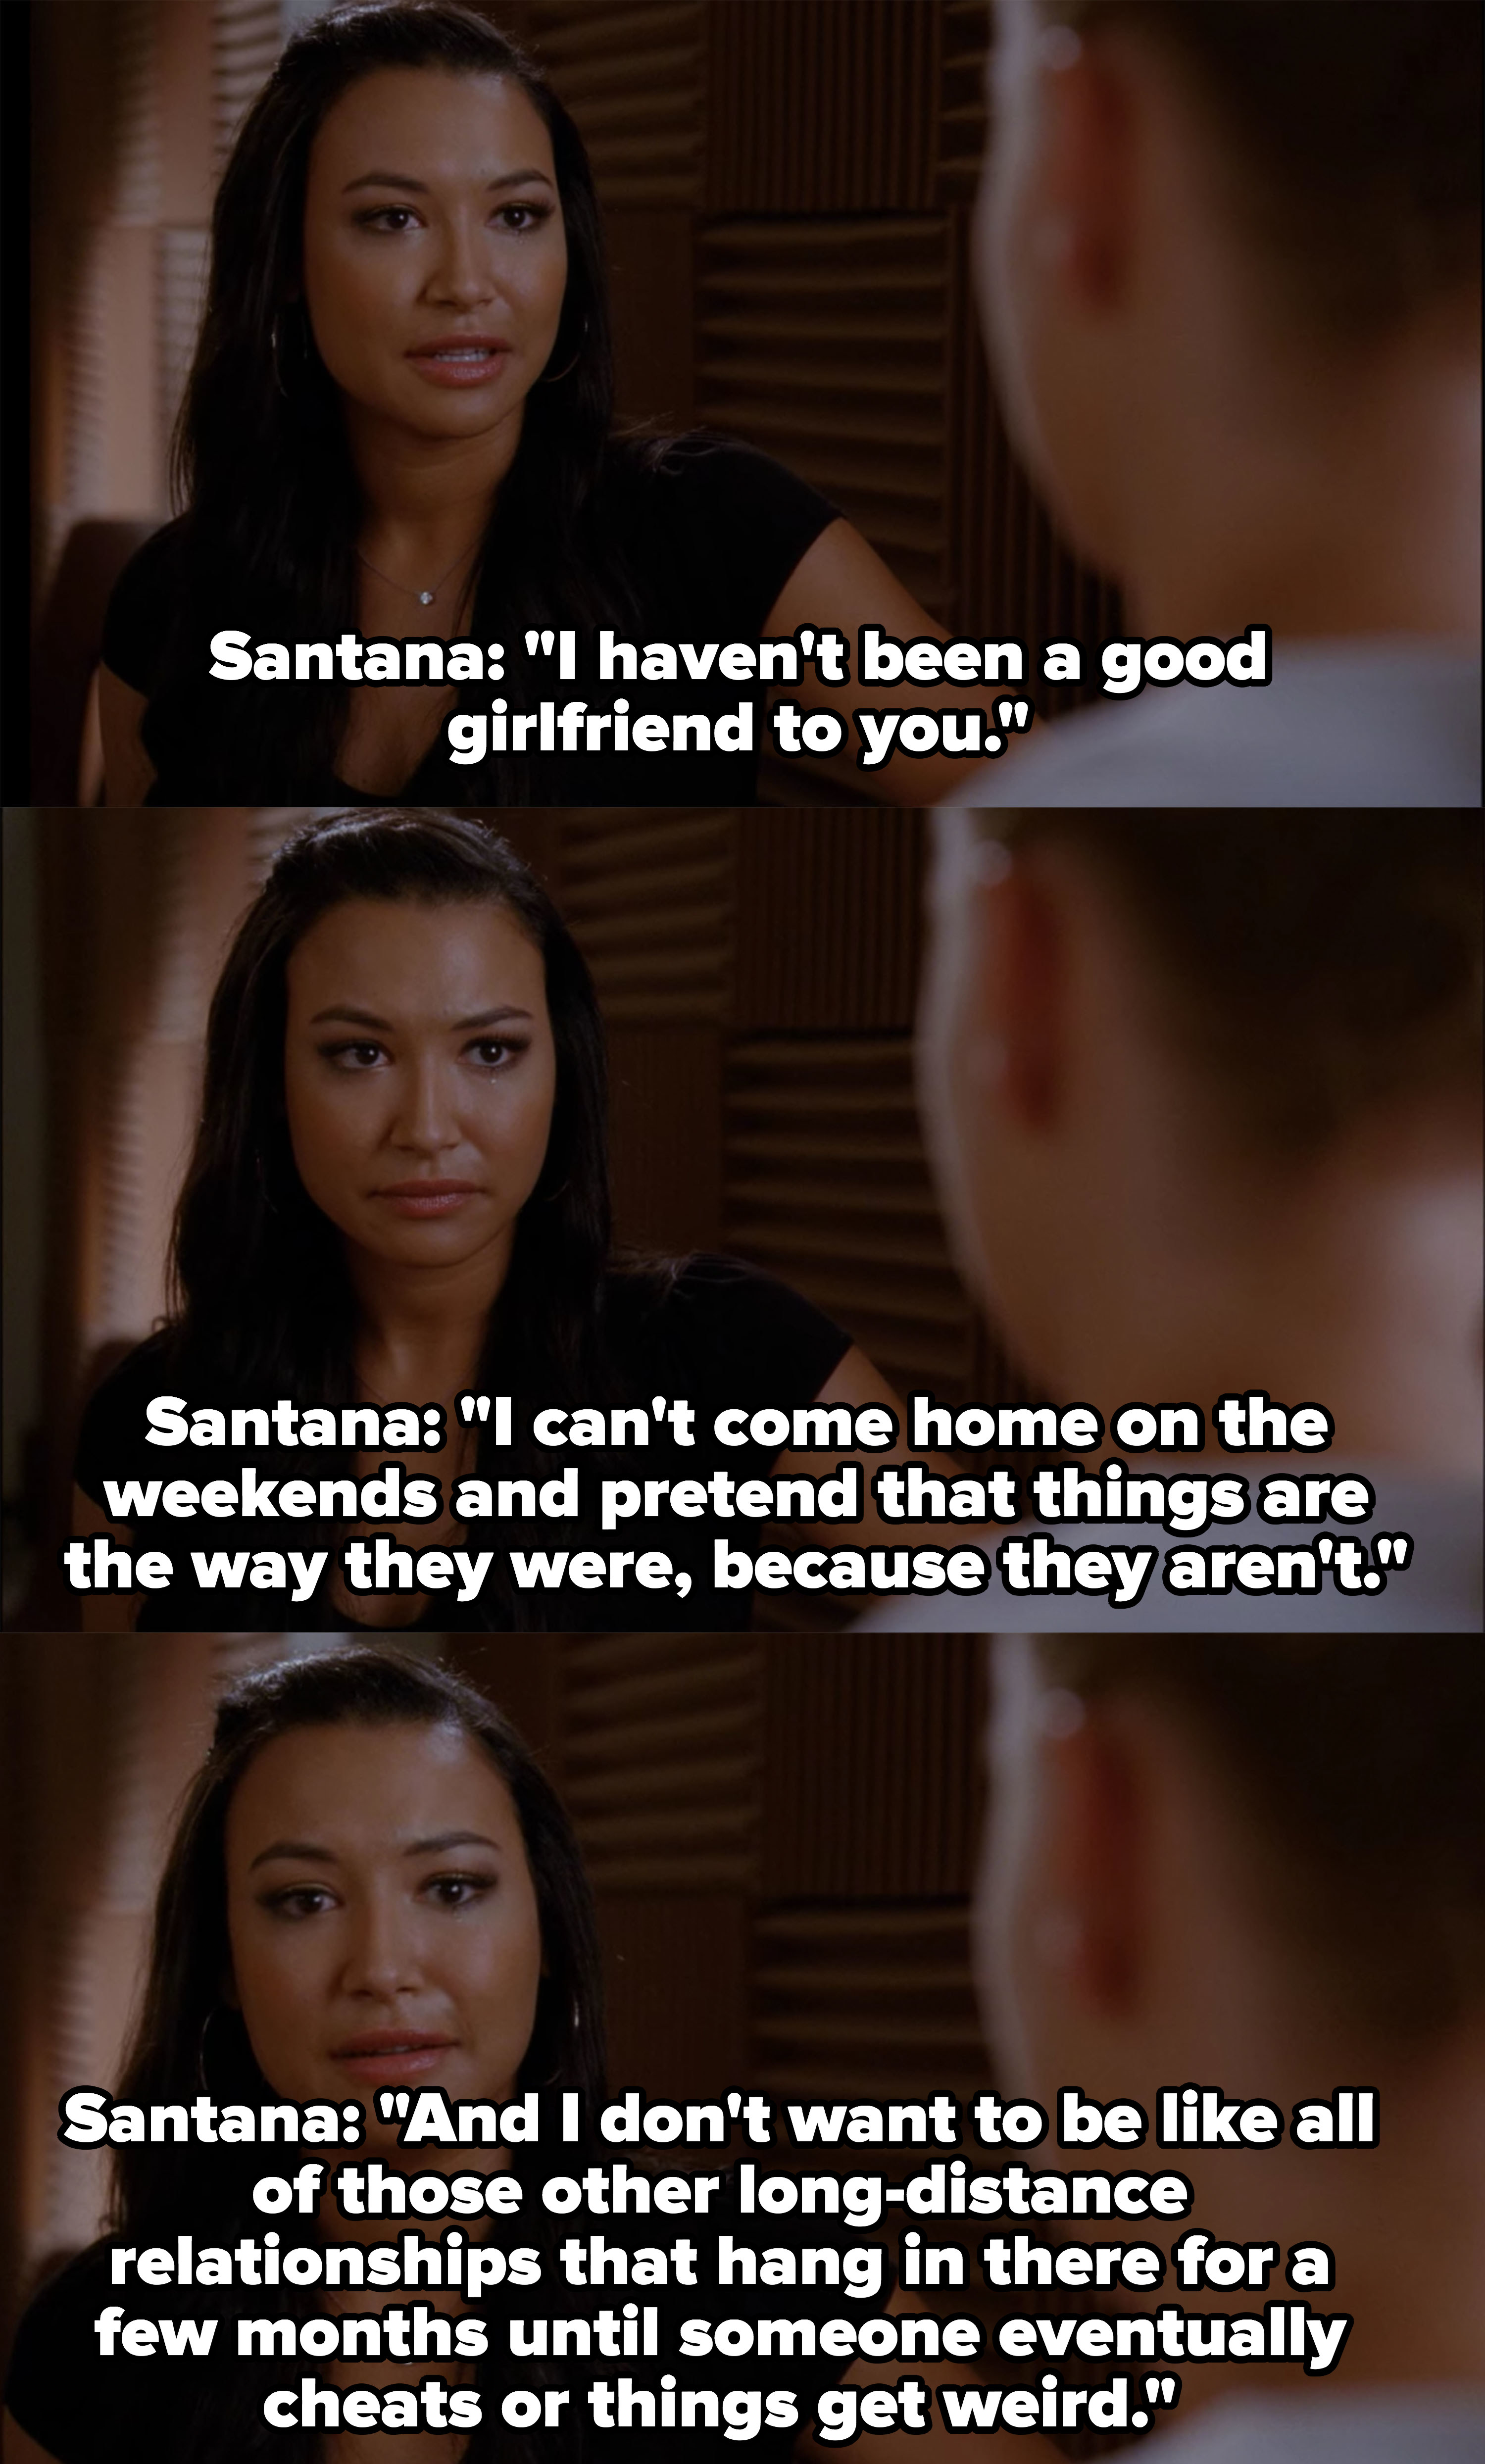 Santana says she hasn&#x27;t been a good girlfriend to Brittany and doesn&#x27;t want them to be unhappy trying to make this long-distance relationship work